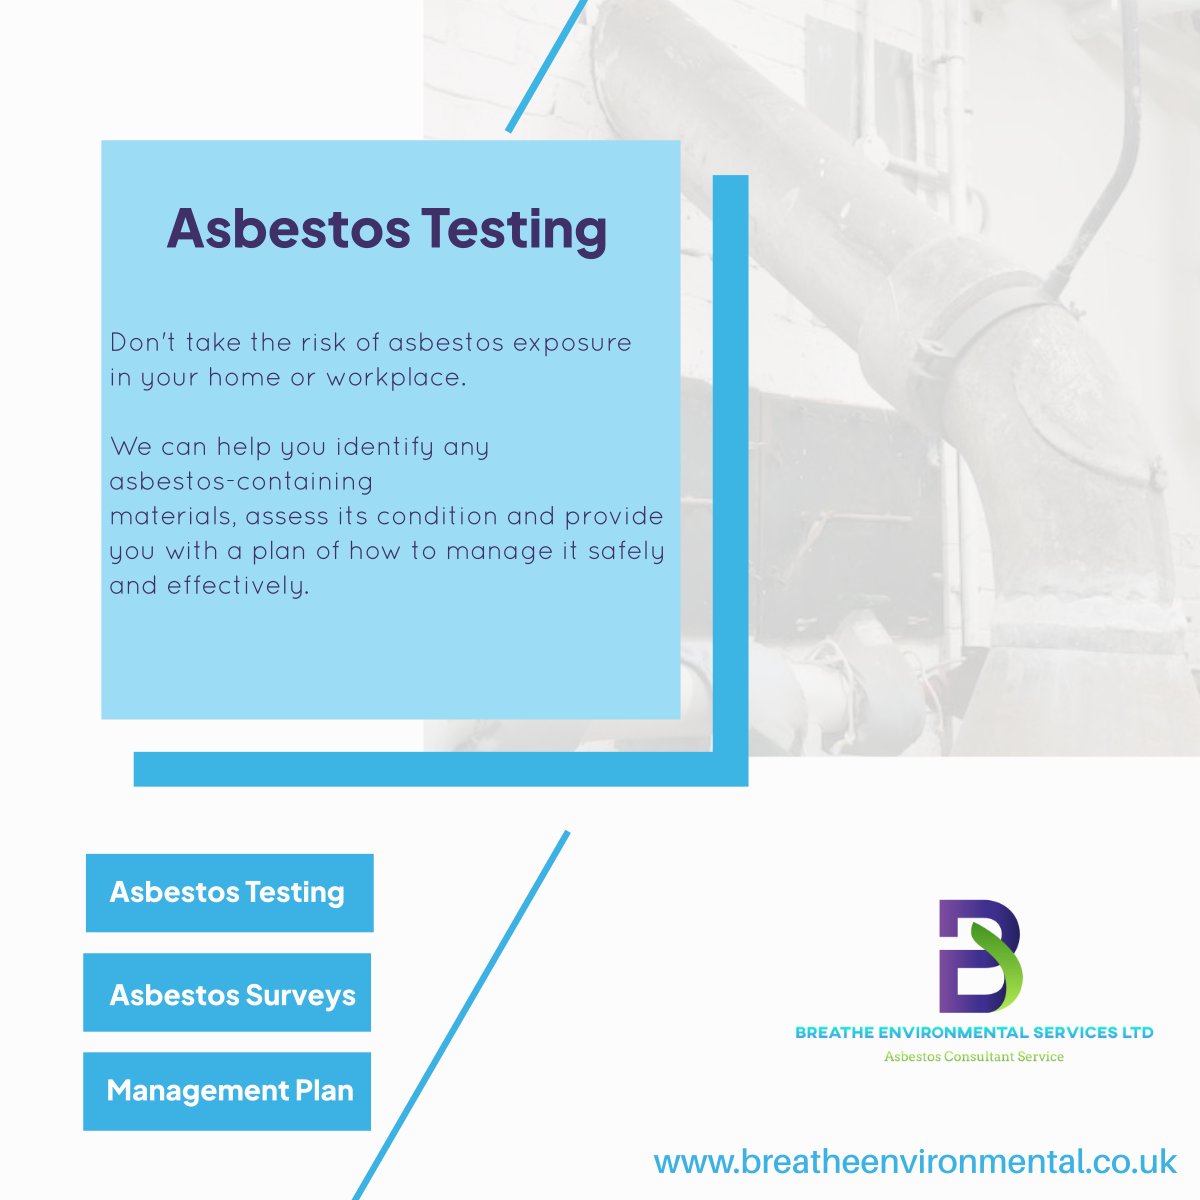 Are you concerned about #asbestos in your home or workplace?

We can carry out asbestos testing to identify any ACMs in your #premises. 

⚠️ There is no safe level of asbestos, don't take the risk of exposure.

#homeowner #landlord #office #manager #facilities  #WorkplaceSafety